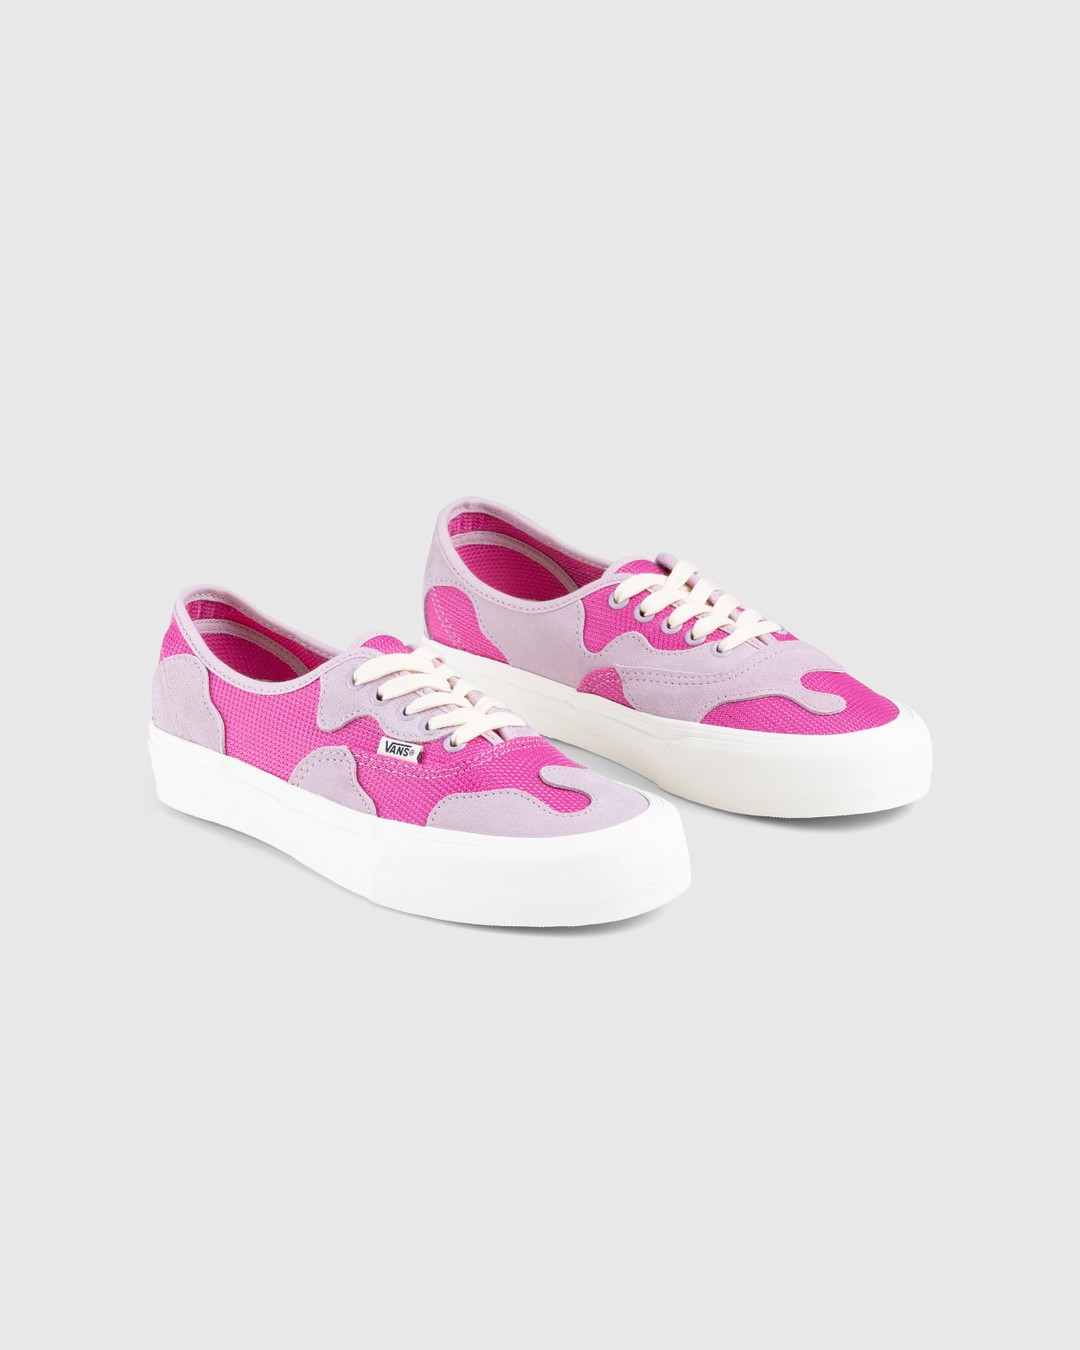 Vans – UA Authentic VR3 PW LX Pink - Sneakers - Pink - Image 3